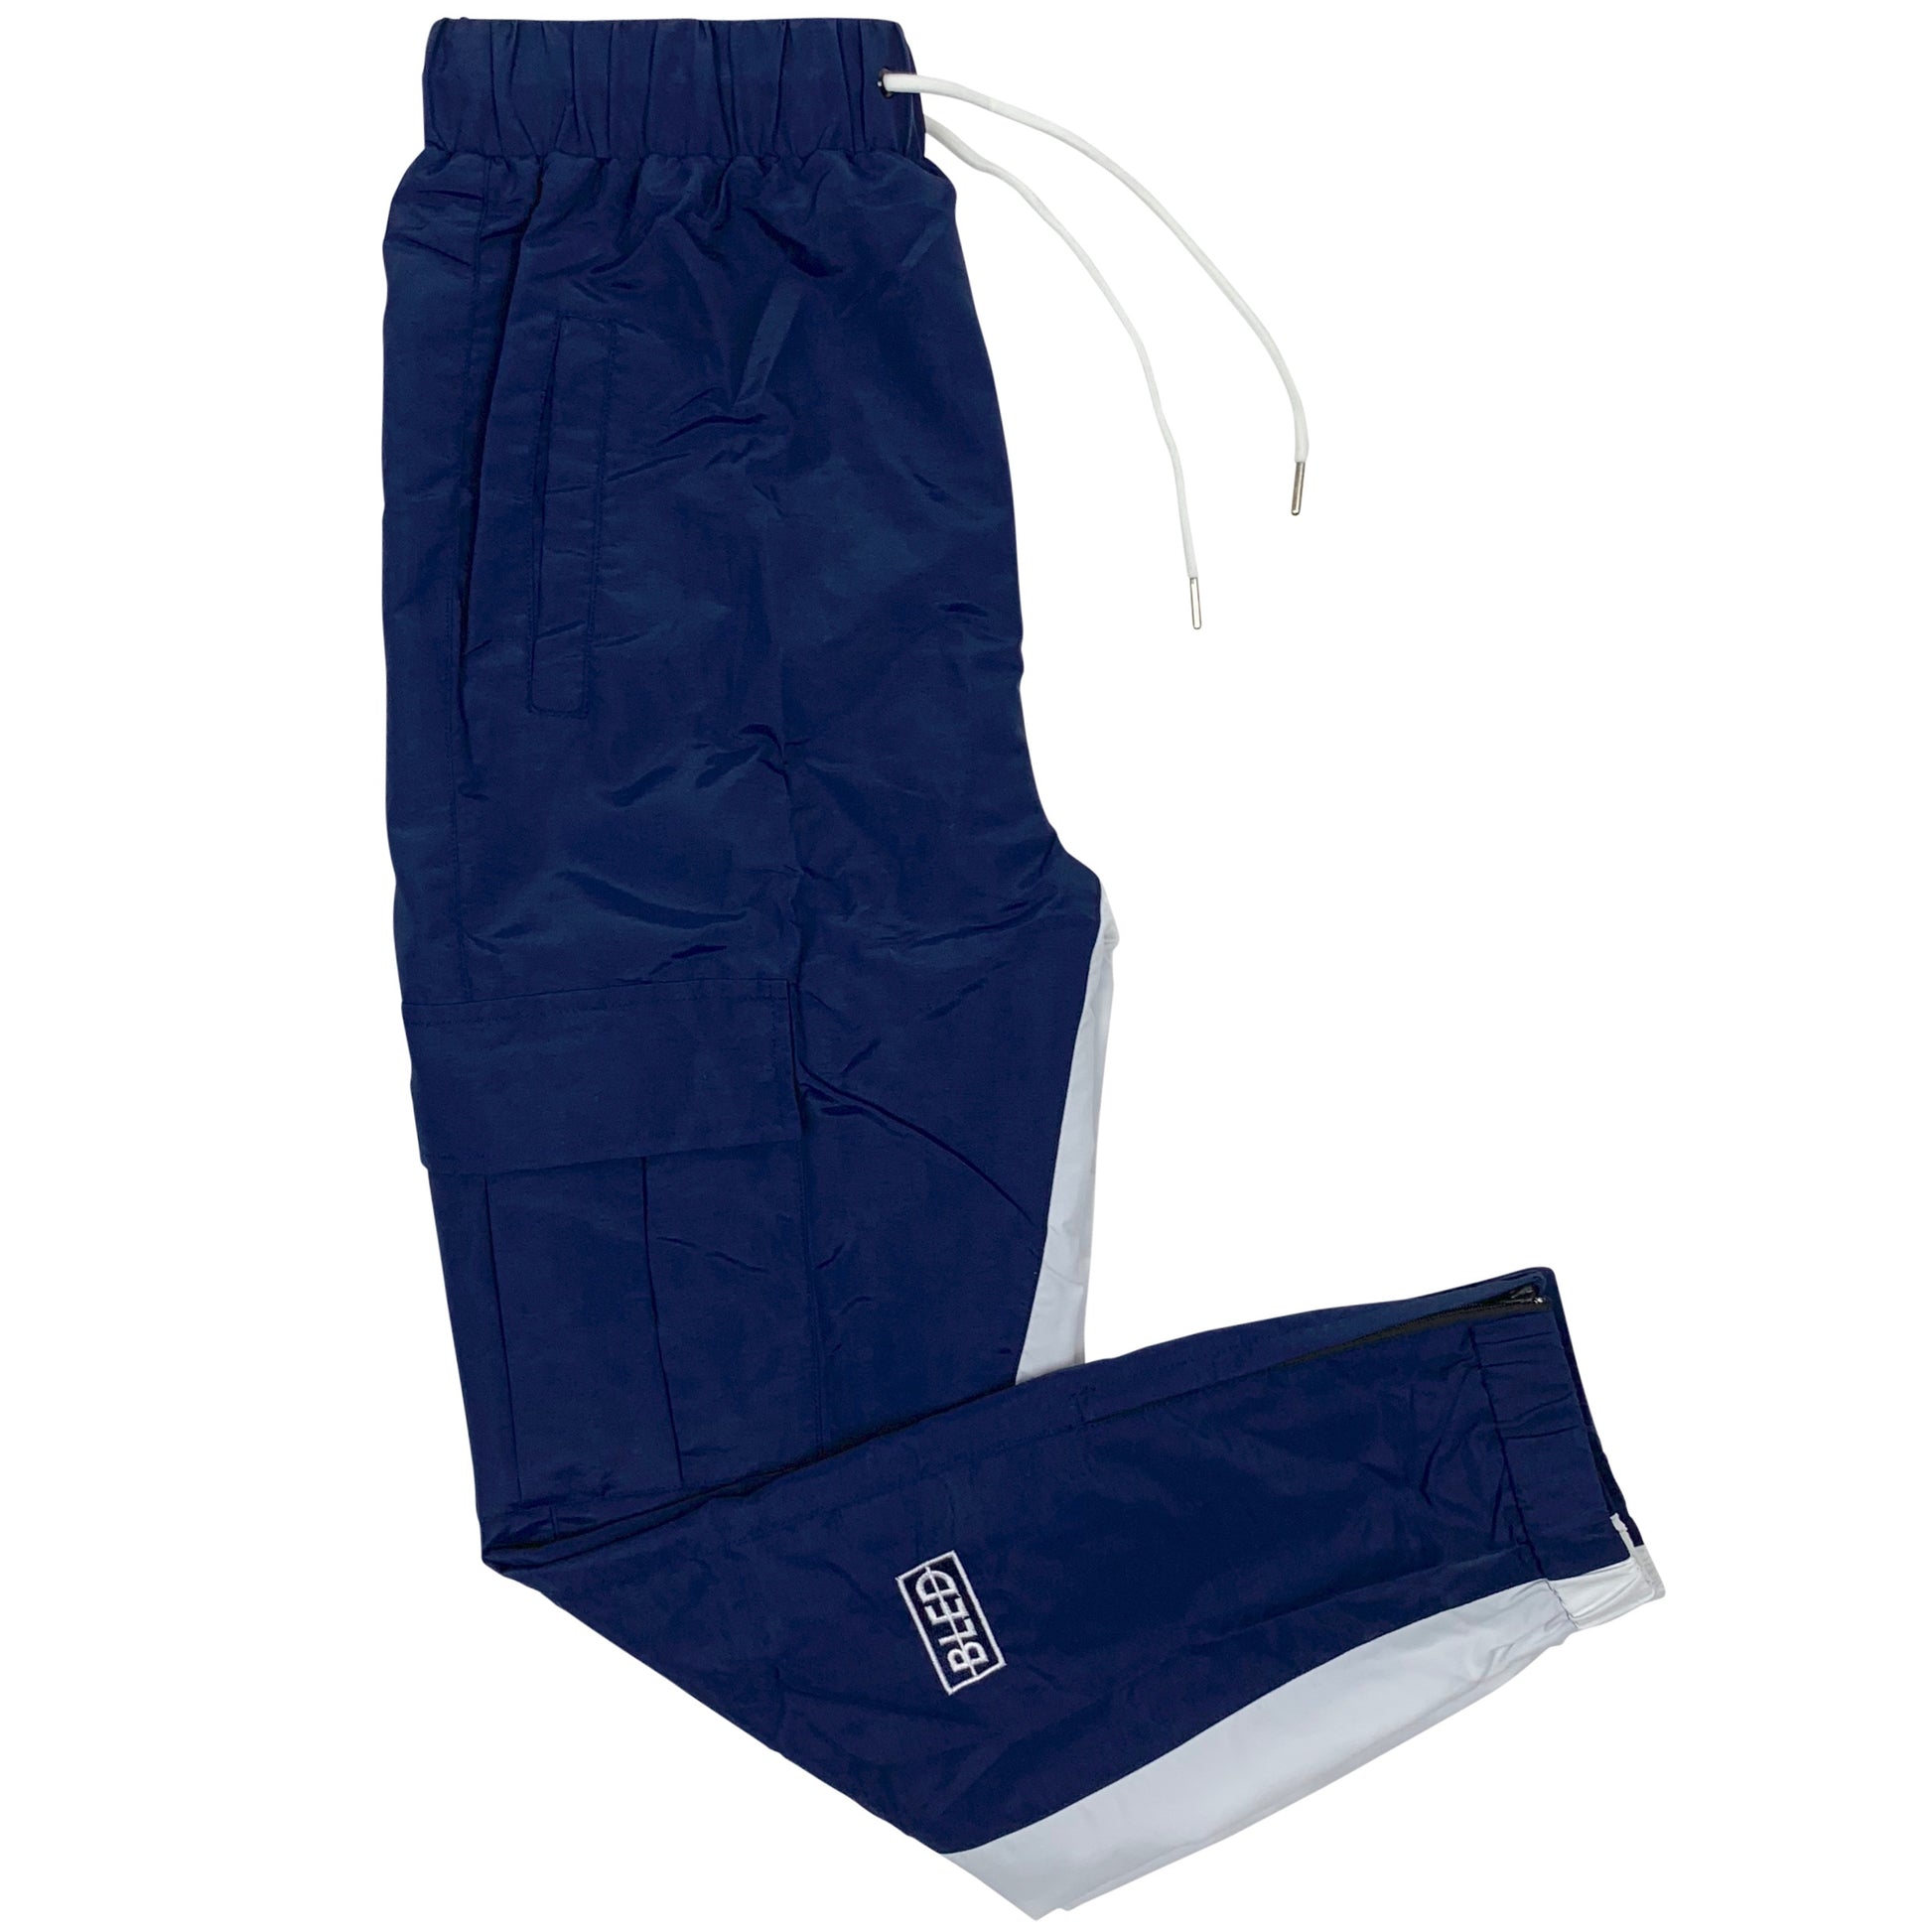 bled navy blue track pant streetwear hype clothing fashion grailed hypebeast